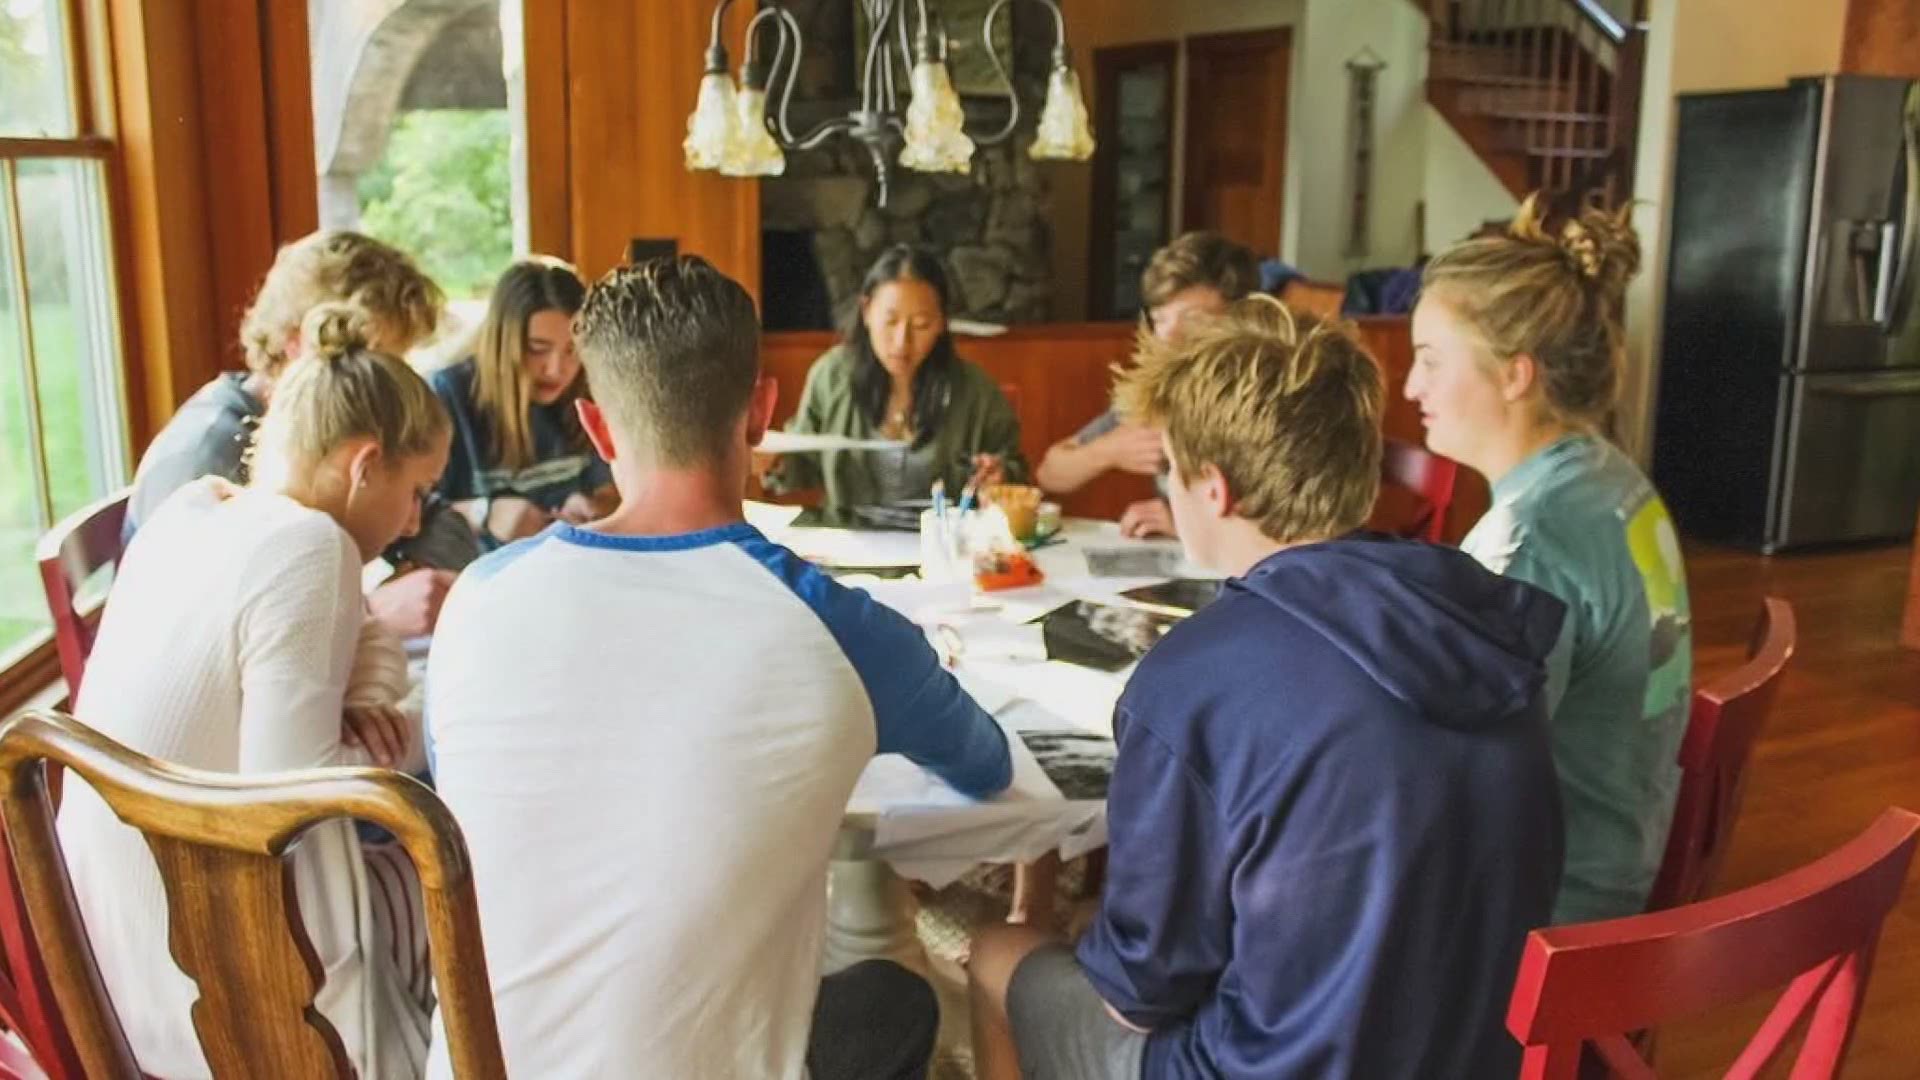 VALO Maine is a free program for teens of all backgrounds once a month, groups of 10 meet for weekend overnight retreats.